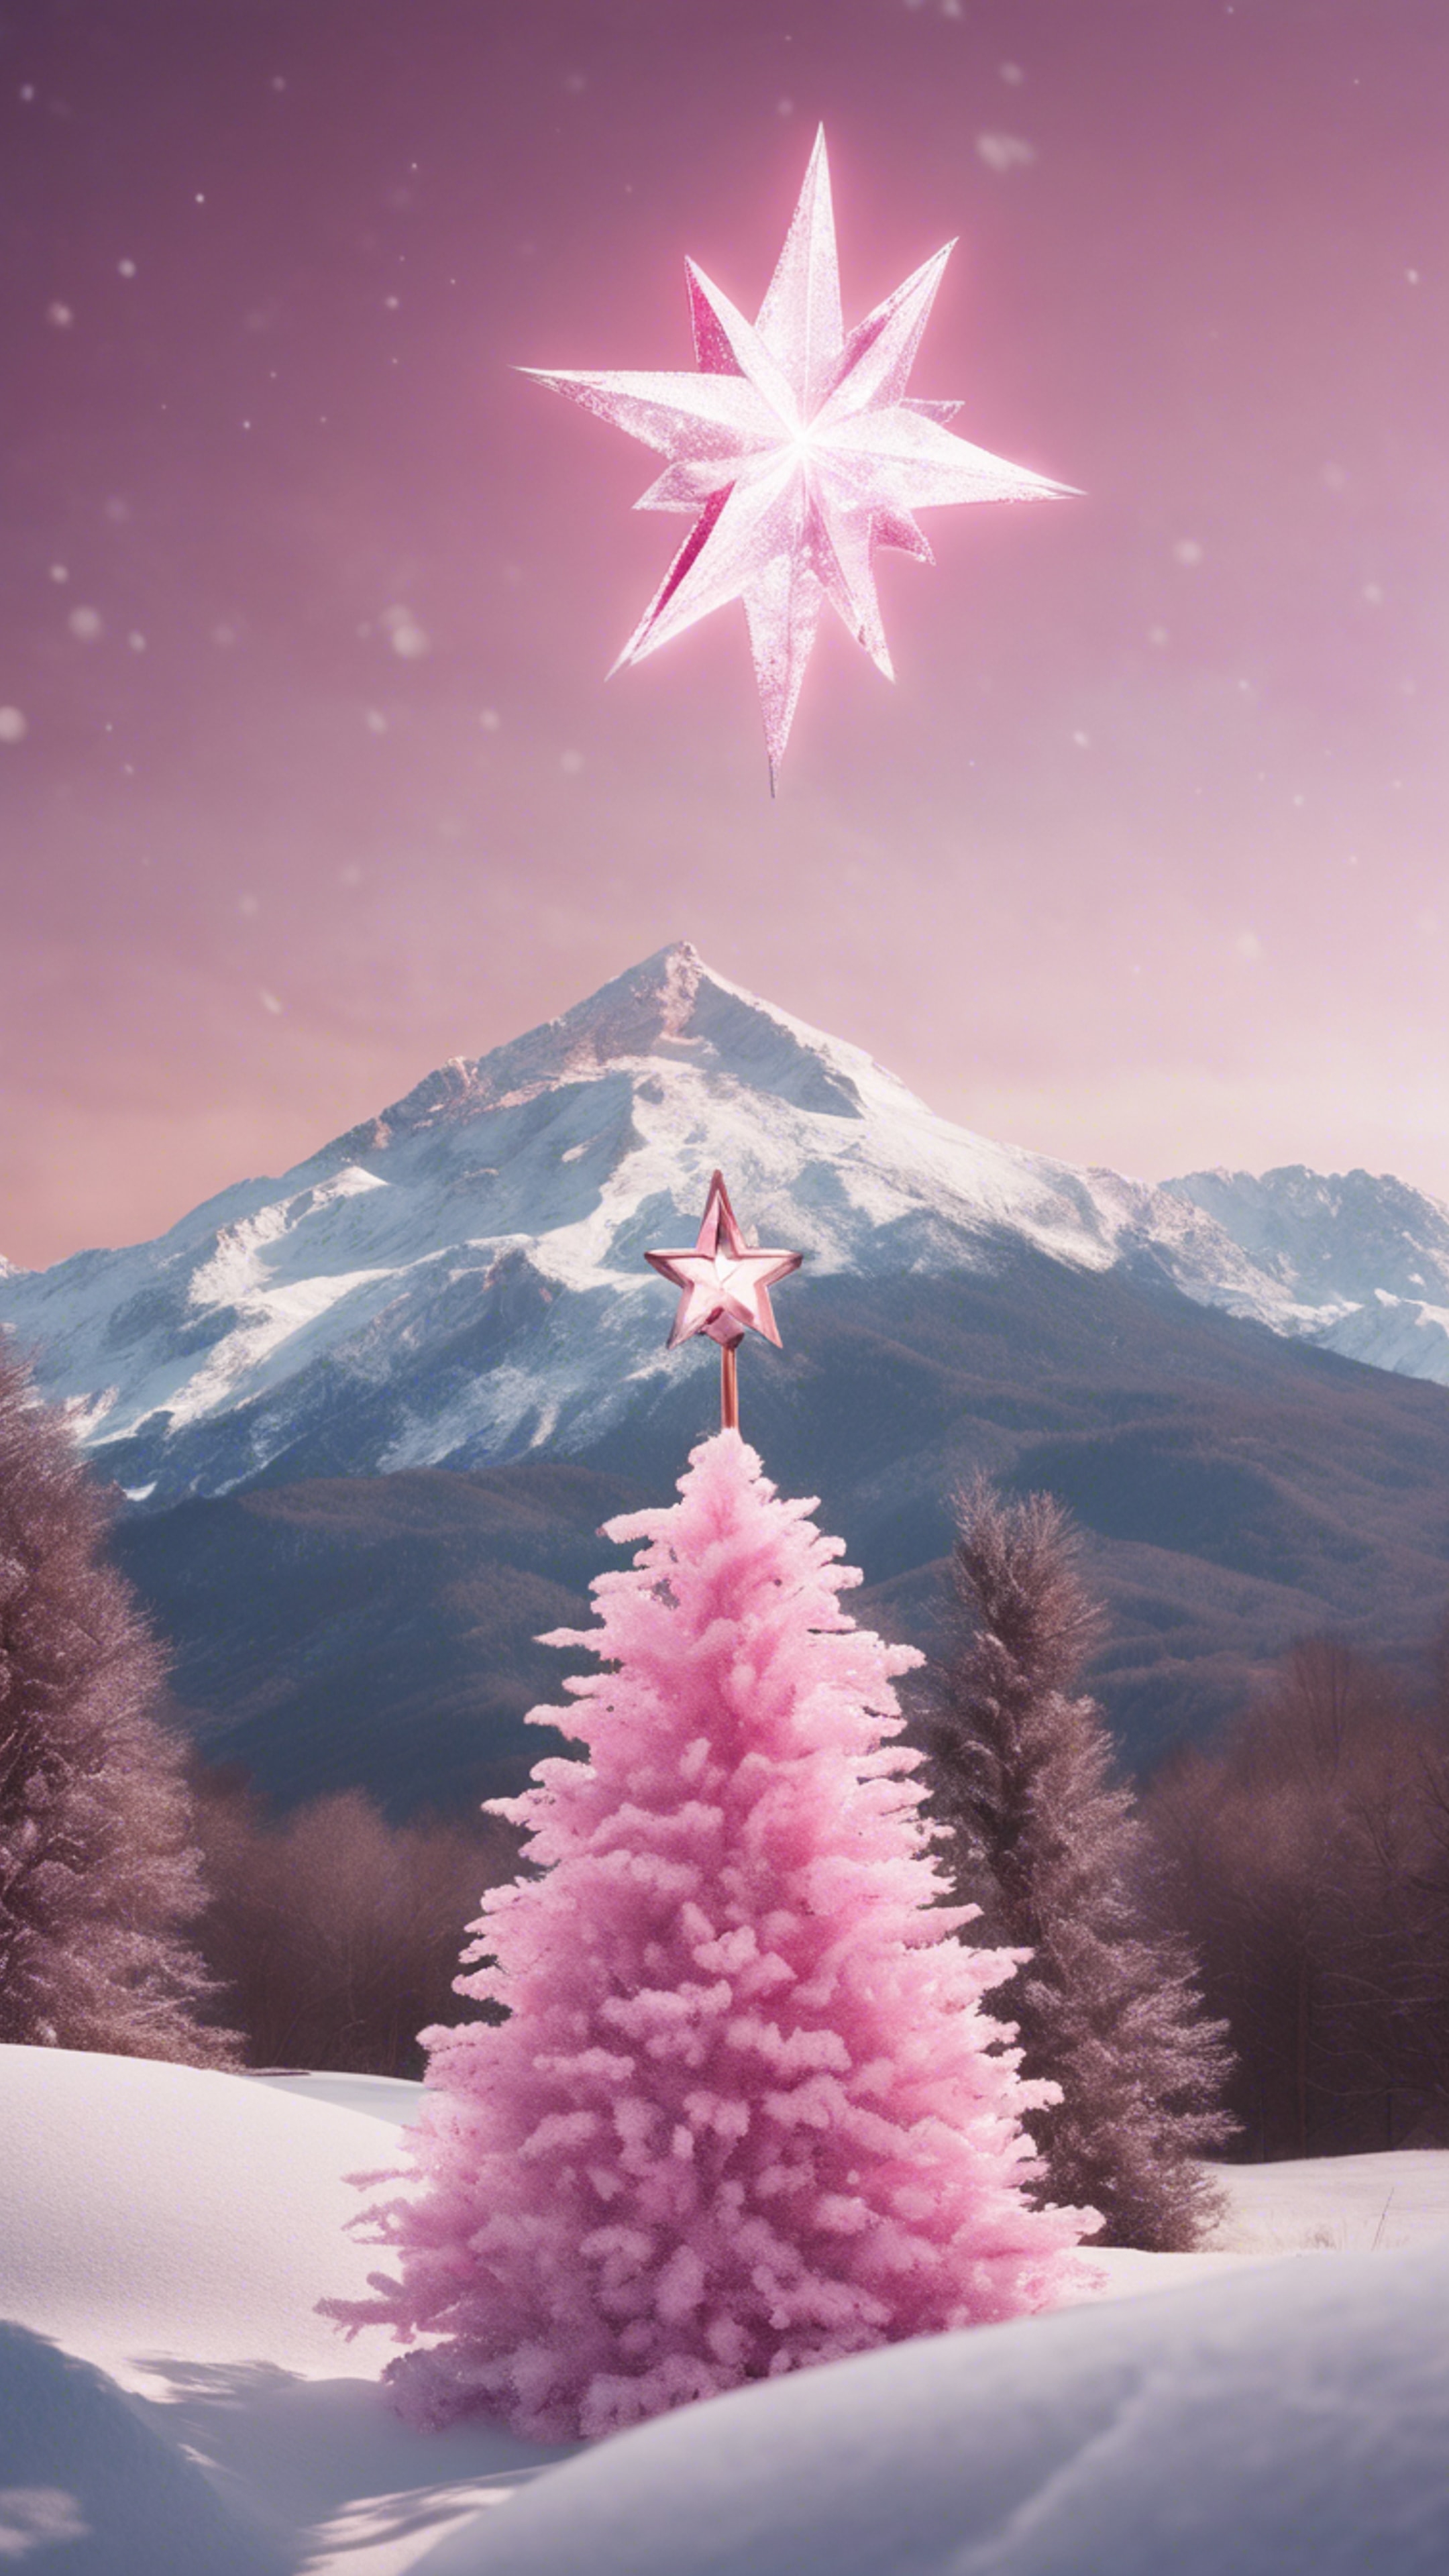 Distant view of a snow-clad mountain with a pink Christmas star shining brightly in the foreground. Обои[48430a4d610446a898be]